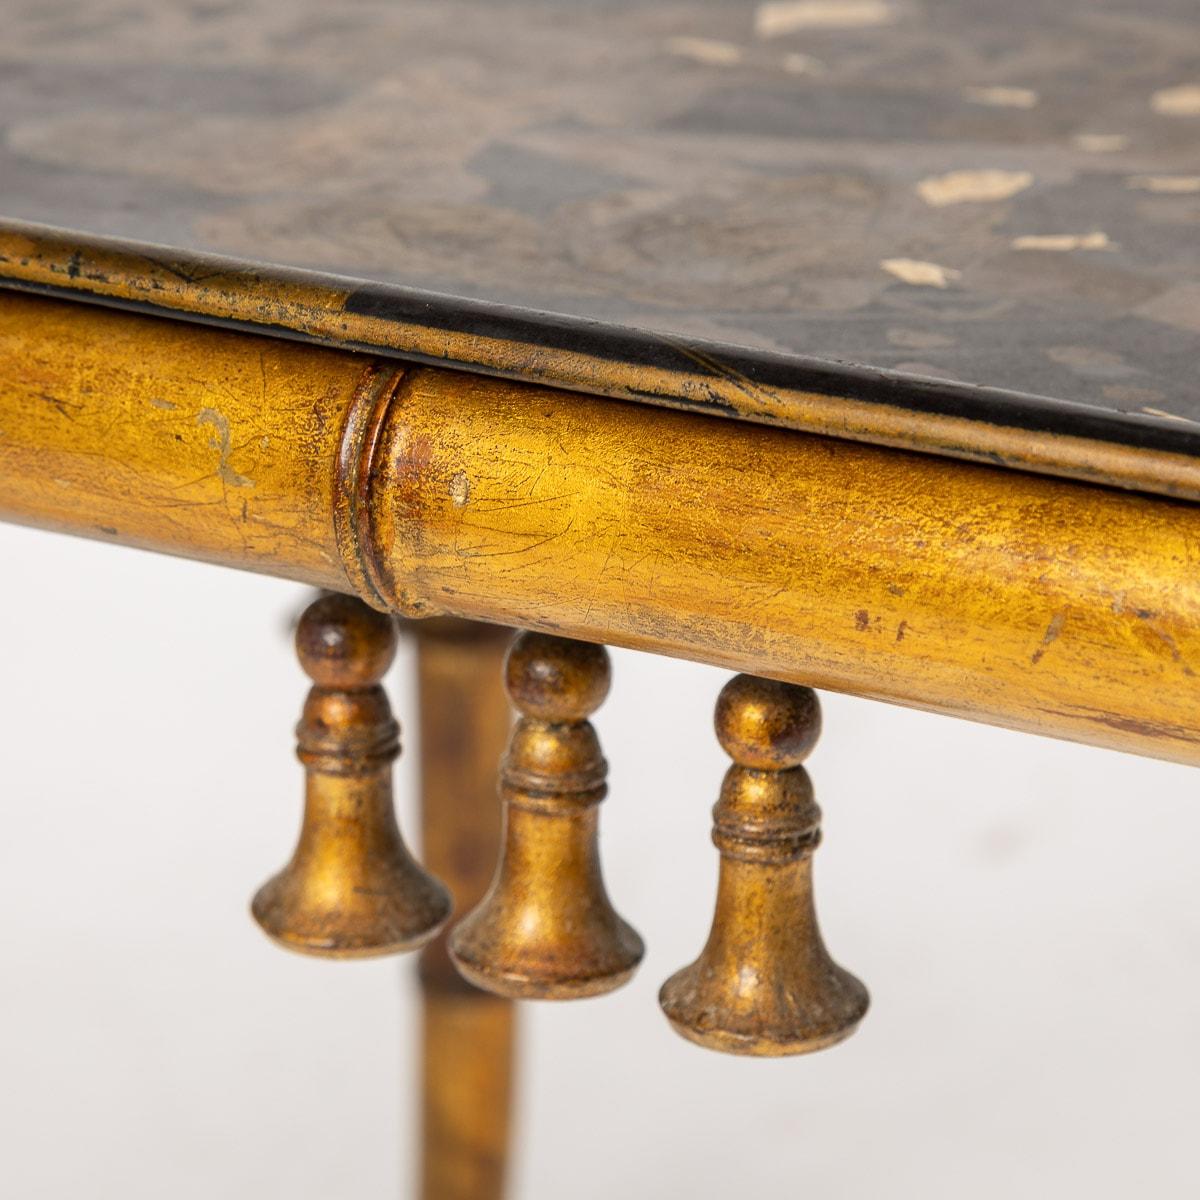 20th Century French Giltwood & Japanese Style Lacquer Table with Tray, C.1880 For Sale 16